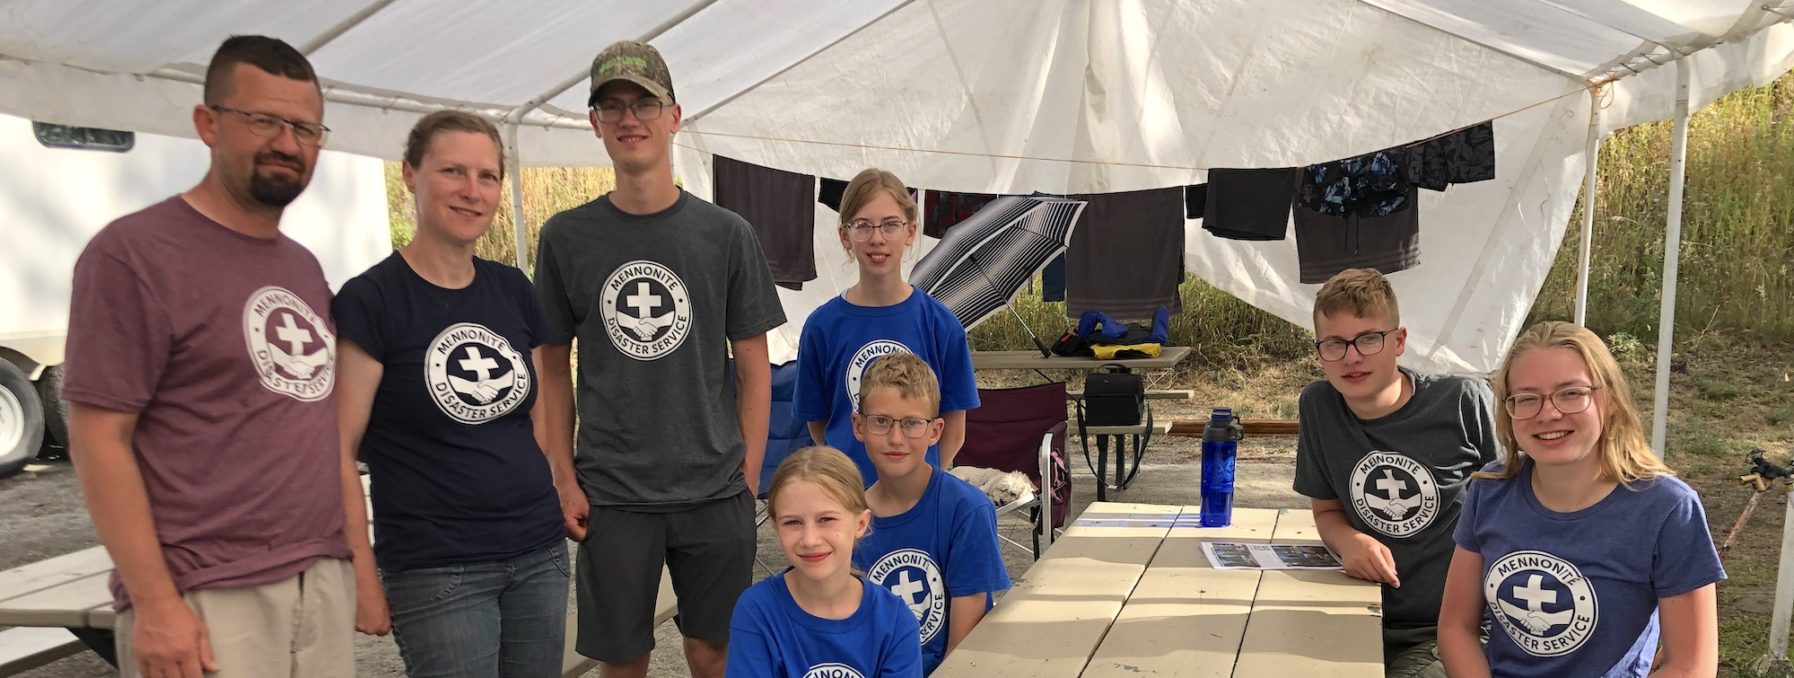 Neudorf family Peter, Susan, Joshua, emma, Jason, bigail, Andrew, Ashley pose for a picture around outdoor tables under a large tent.